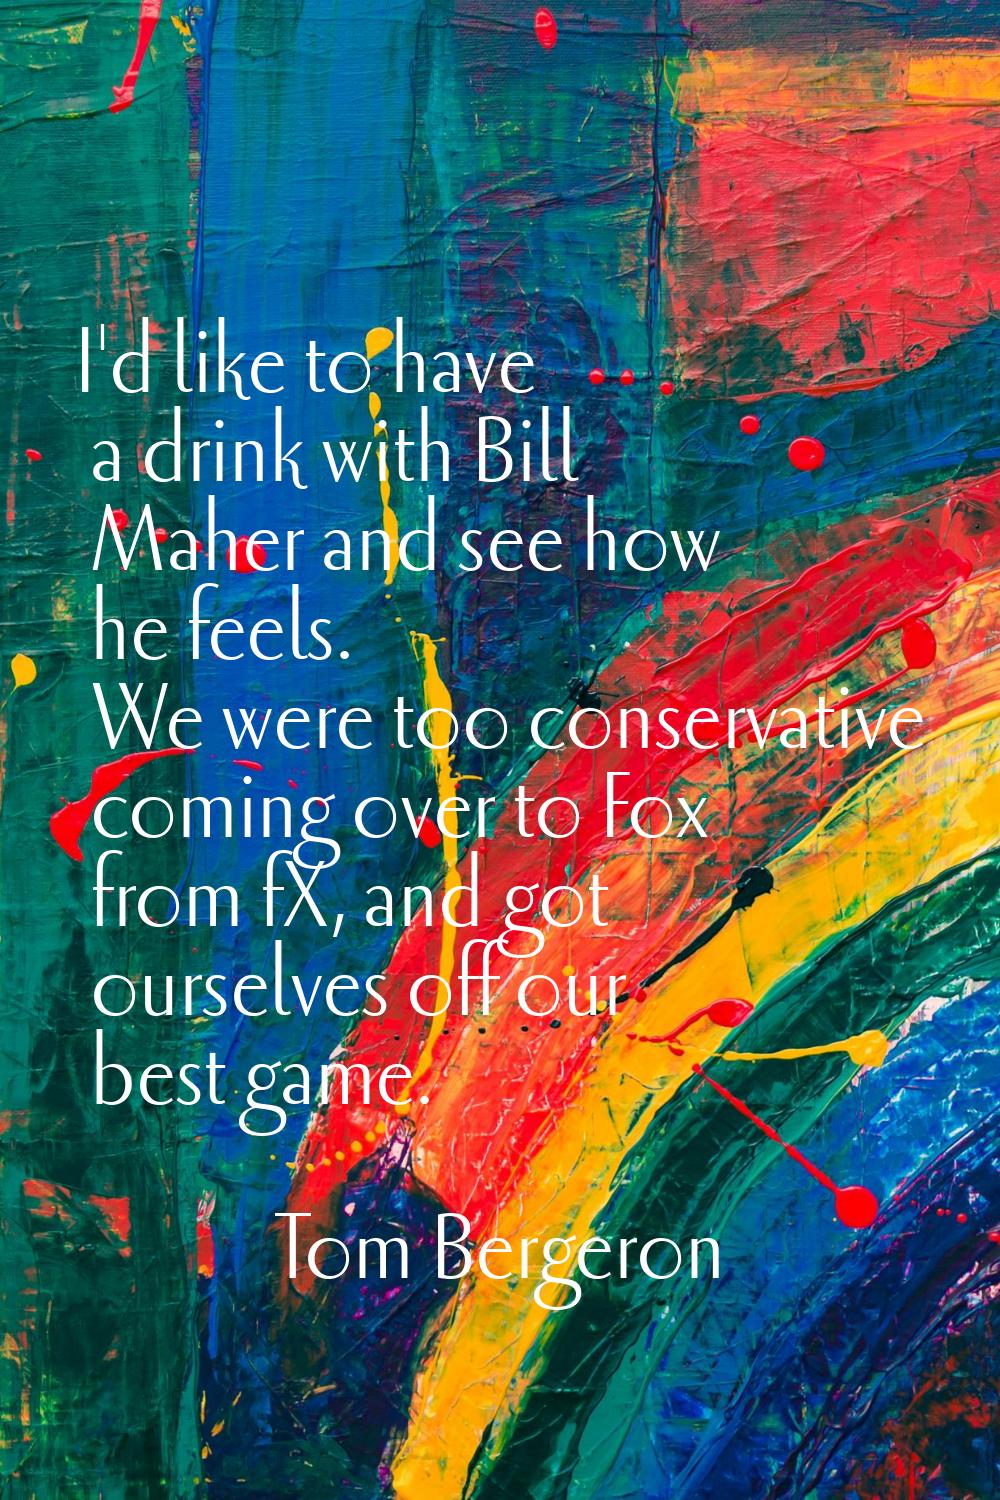 I'd like to have a drink with Bill Maher and see how he feels. We were too conservative coming over